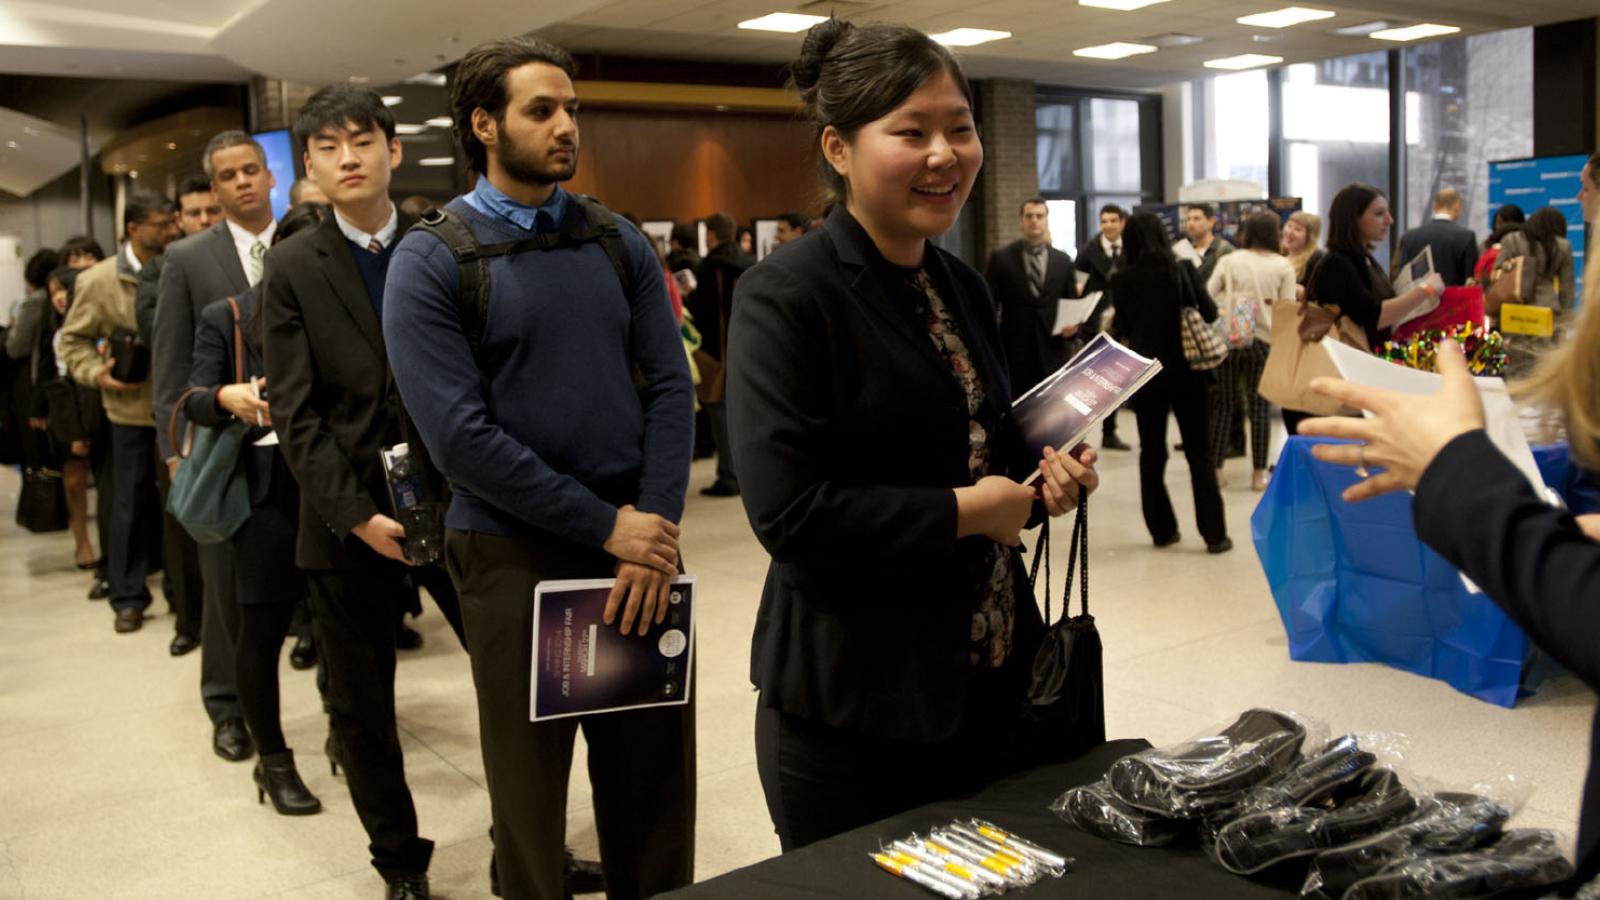 Lubin students attending a career fair on the New York City Campus